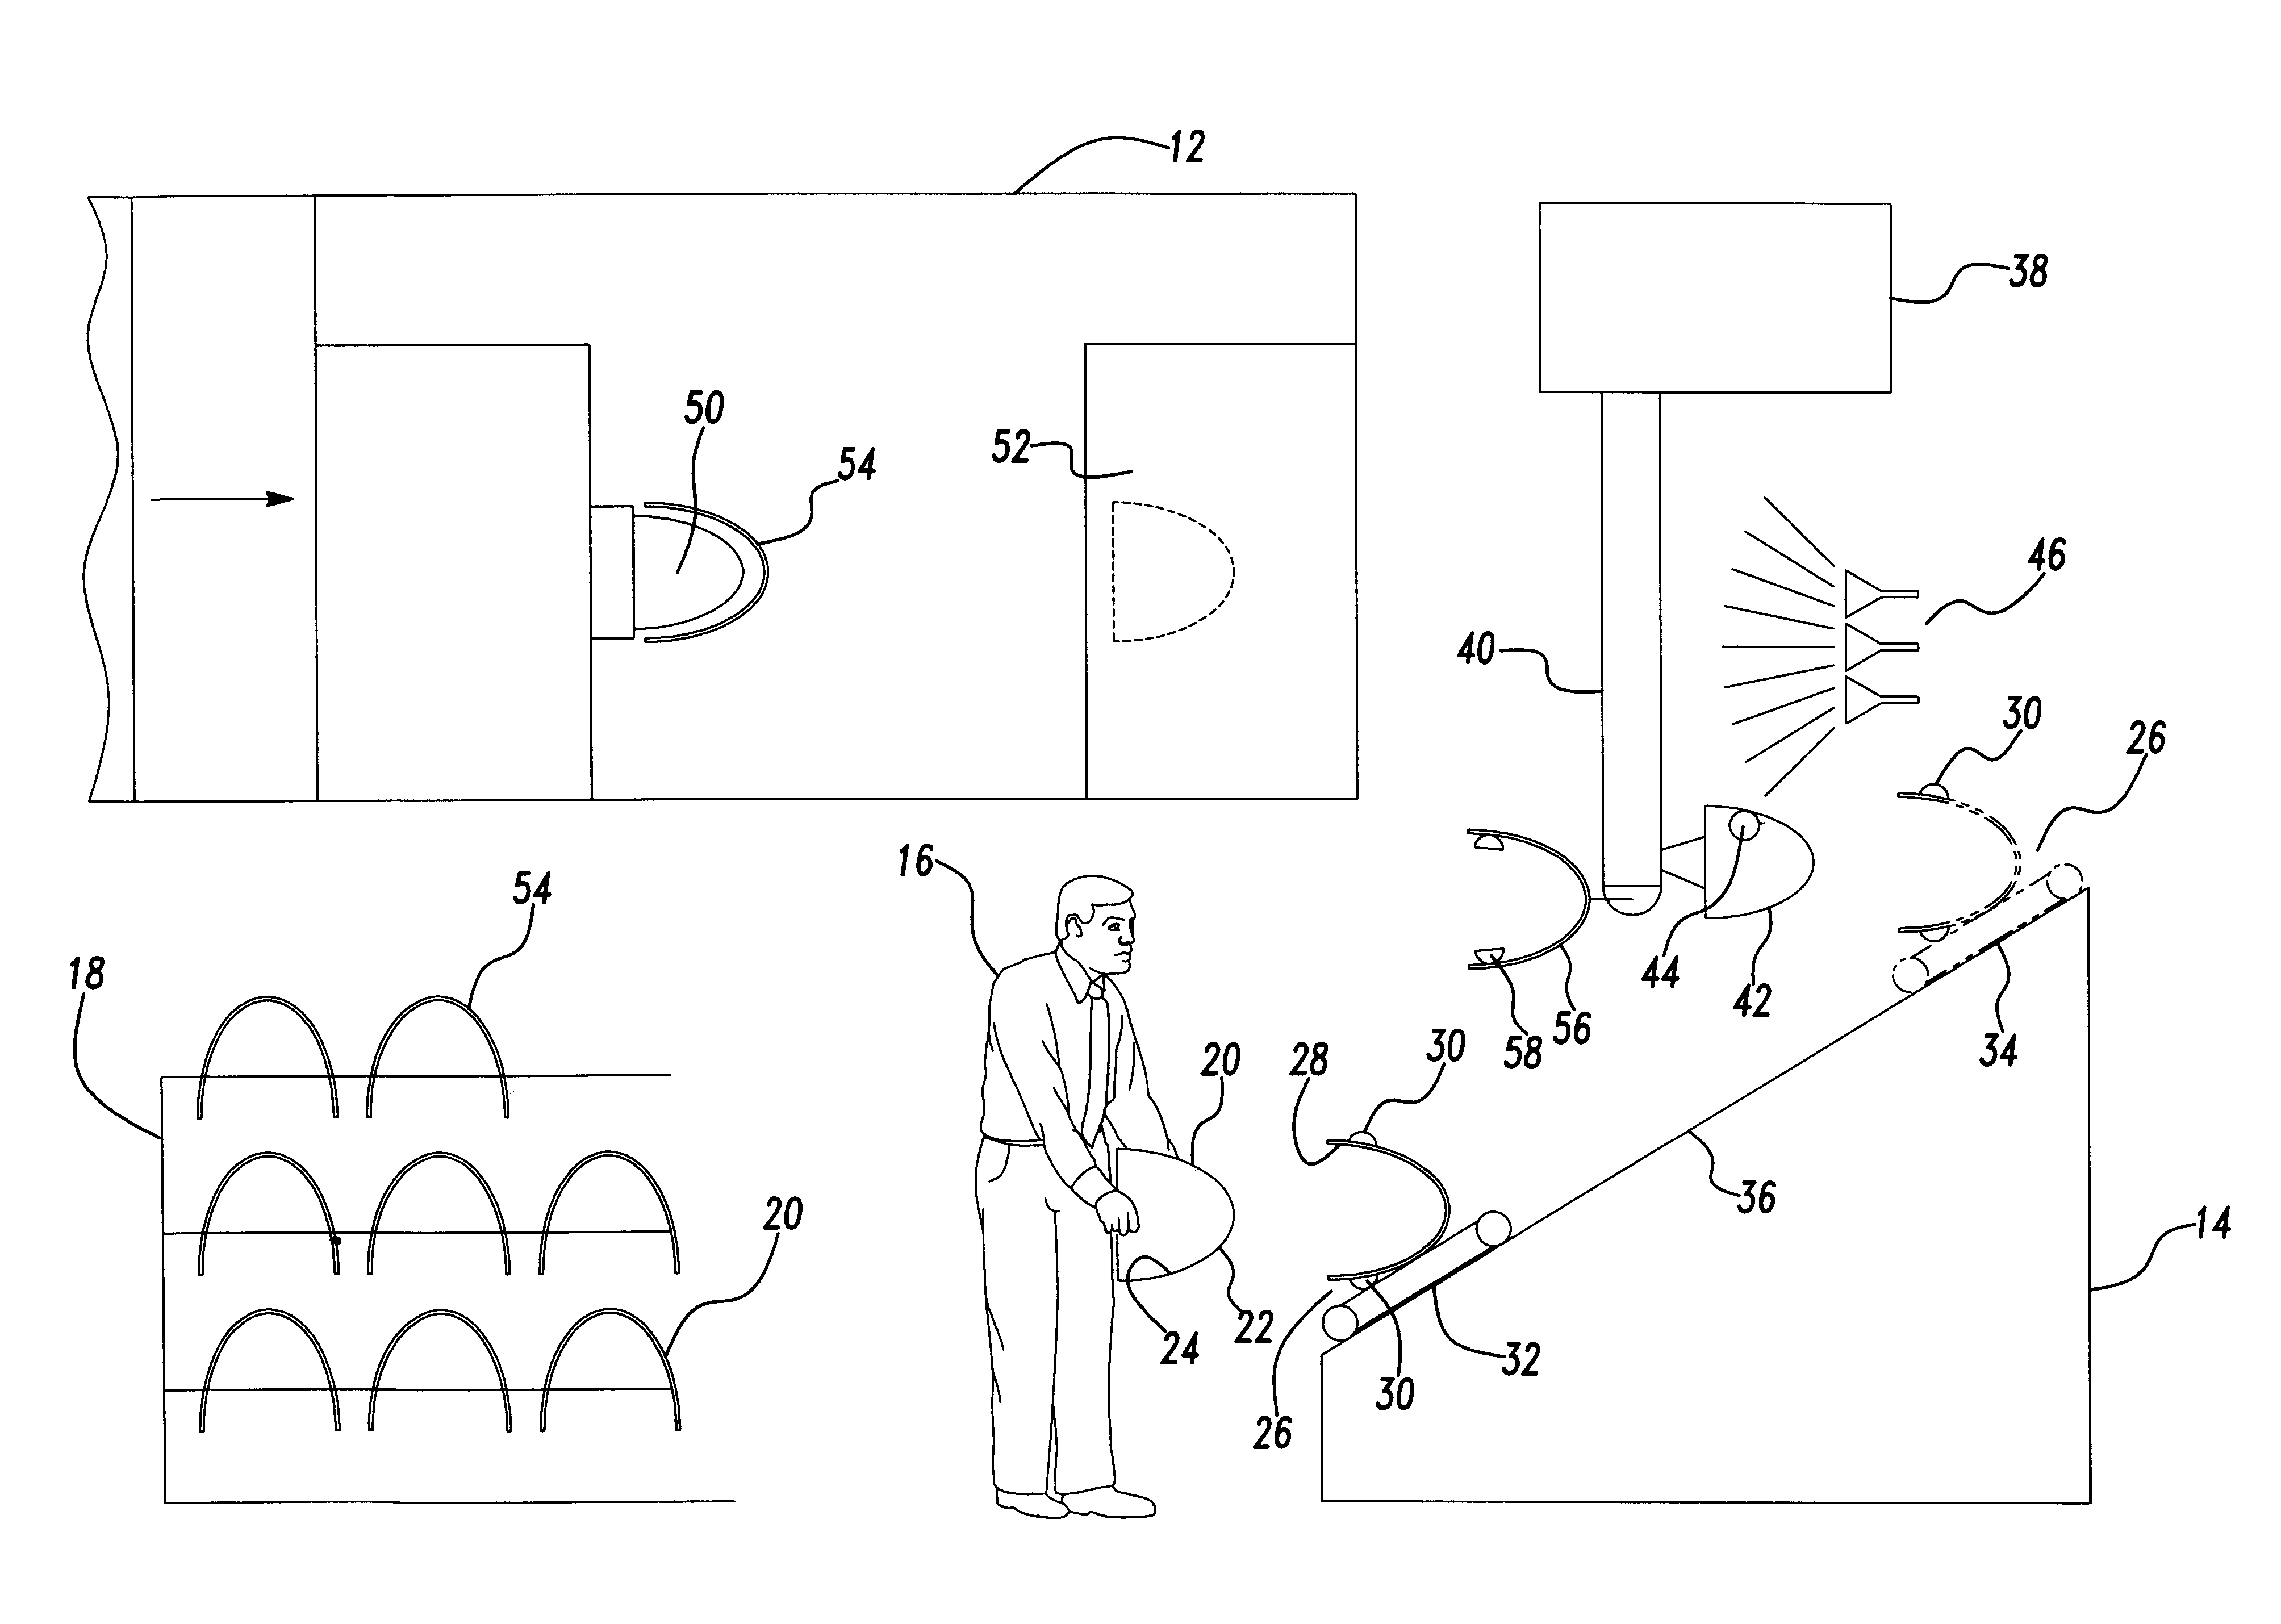 Method of manufacturing a film coated article